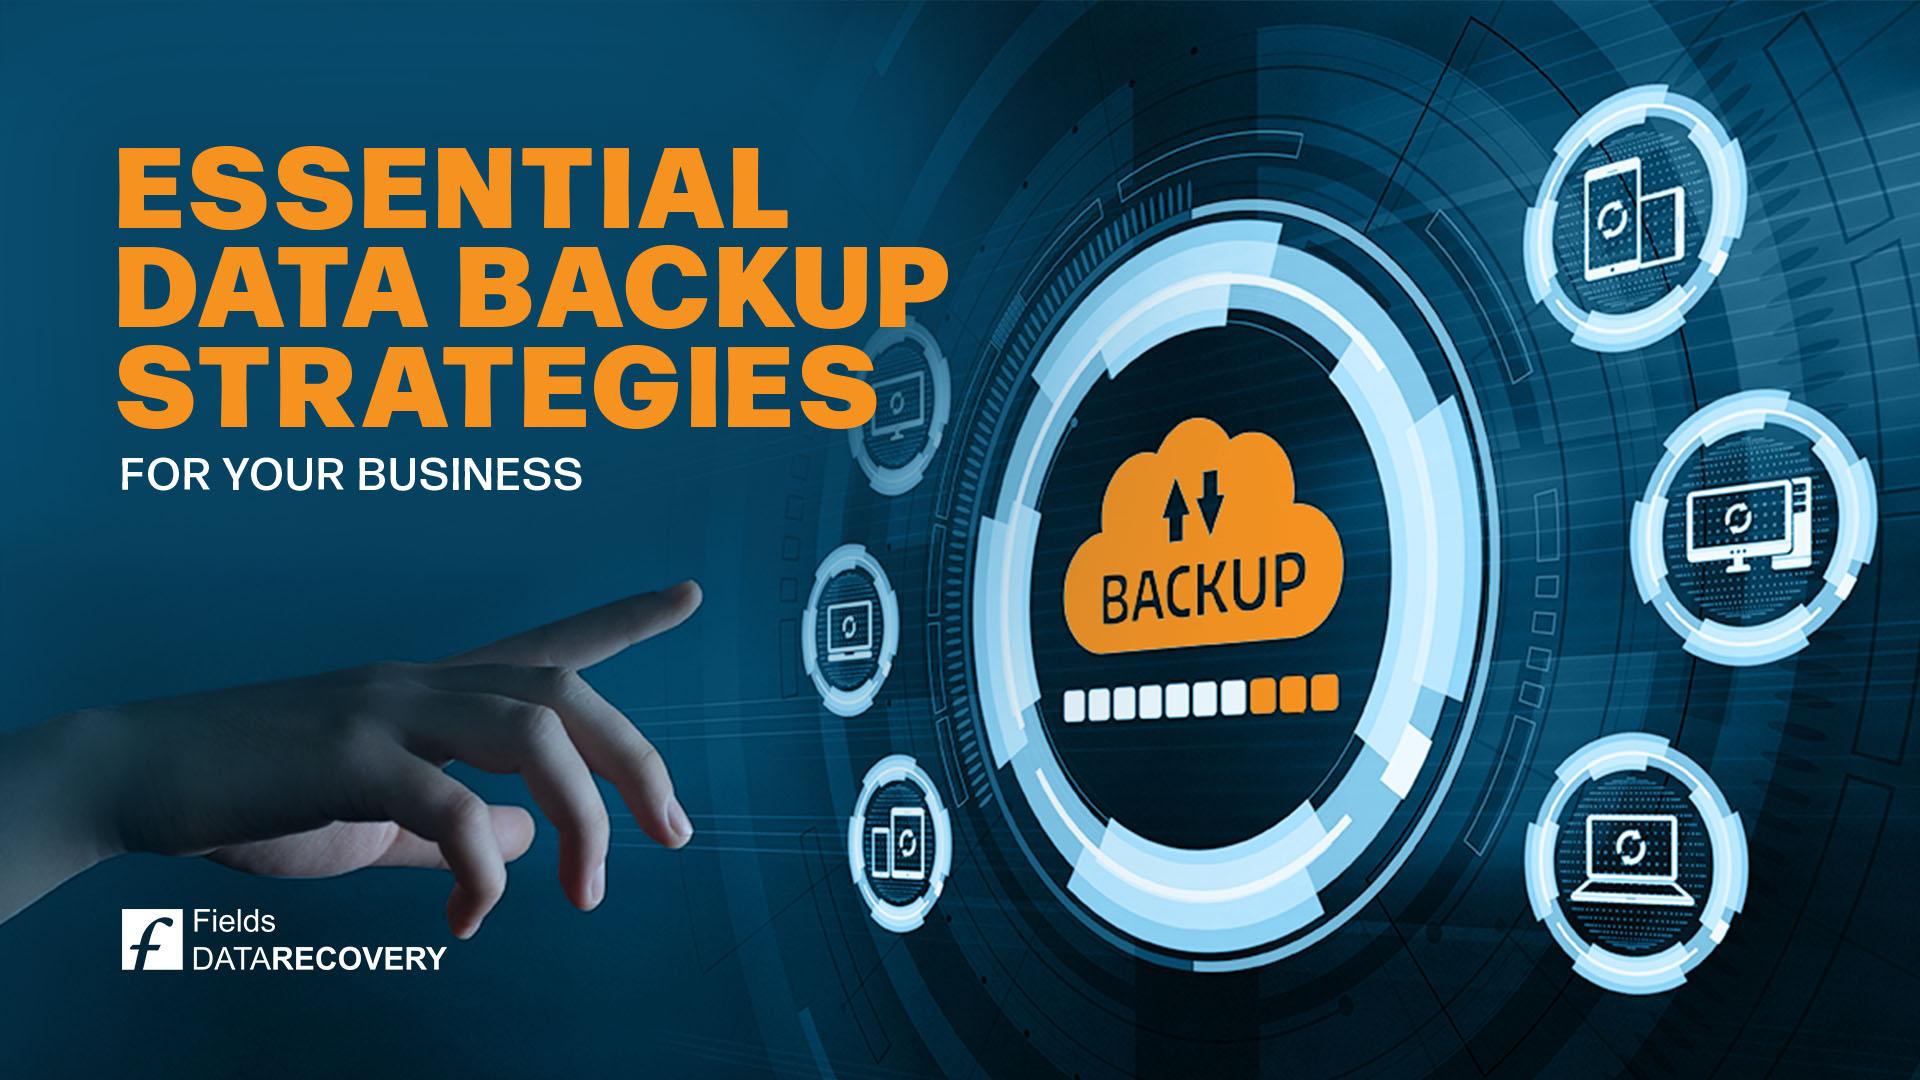 Essential Data Backup Strategies for Your Business